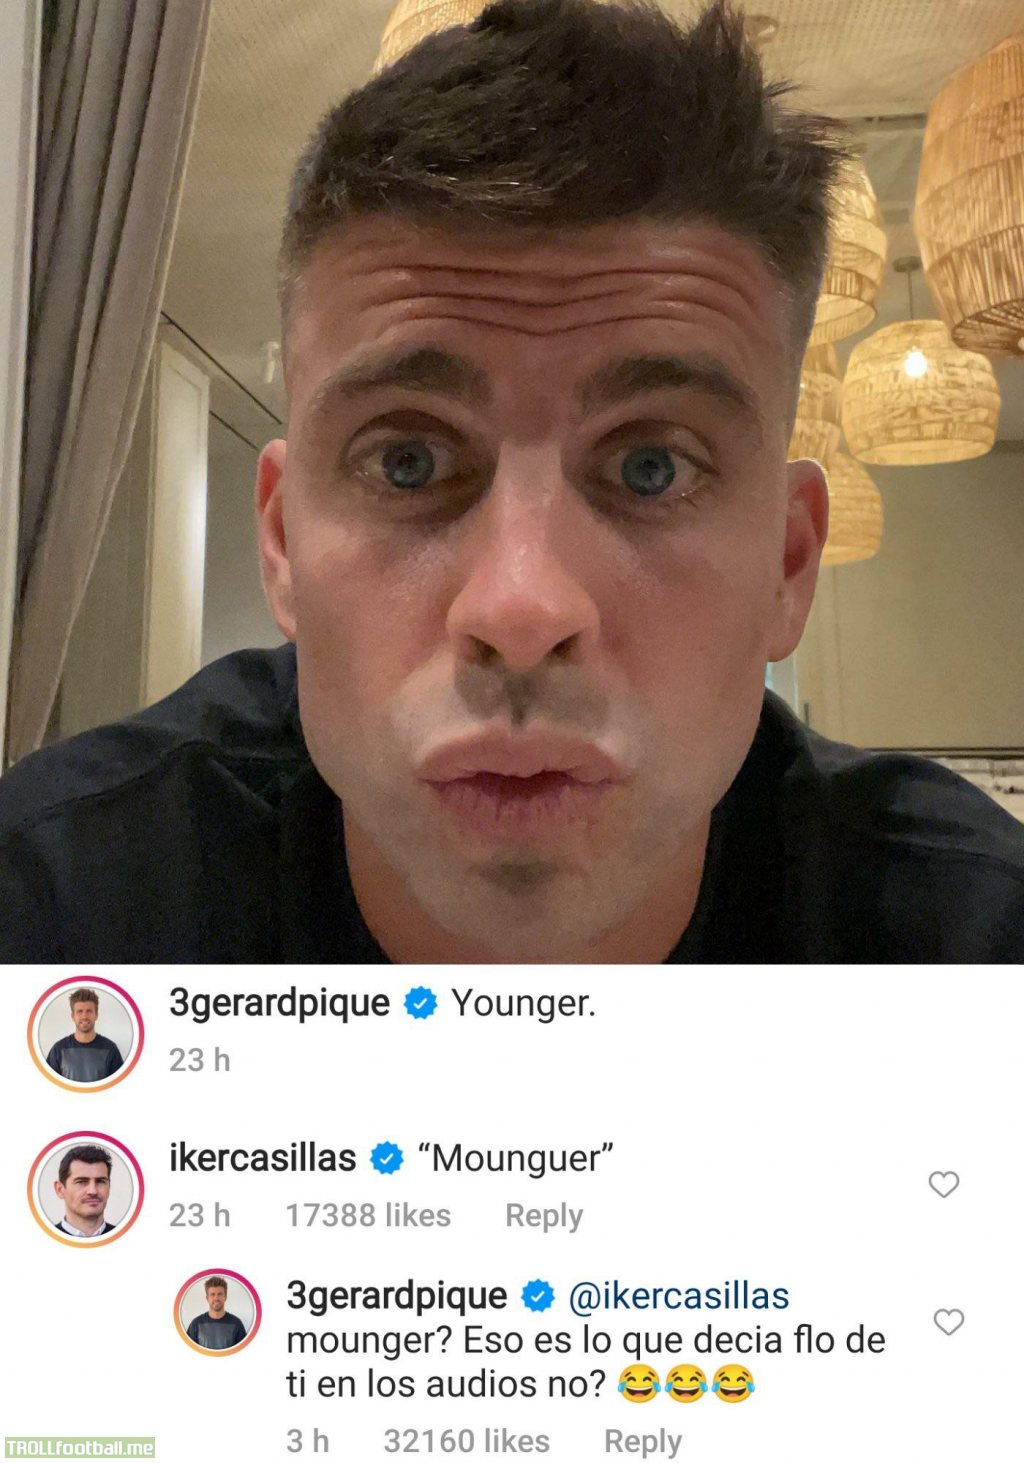 Piqué on IG “Younger”. To which Casillas commented “Mounguer” (Idiot). Piqué then replied “Isn’t that what Flo said about you in the recordings?”